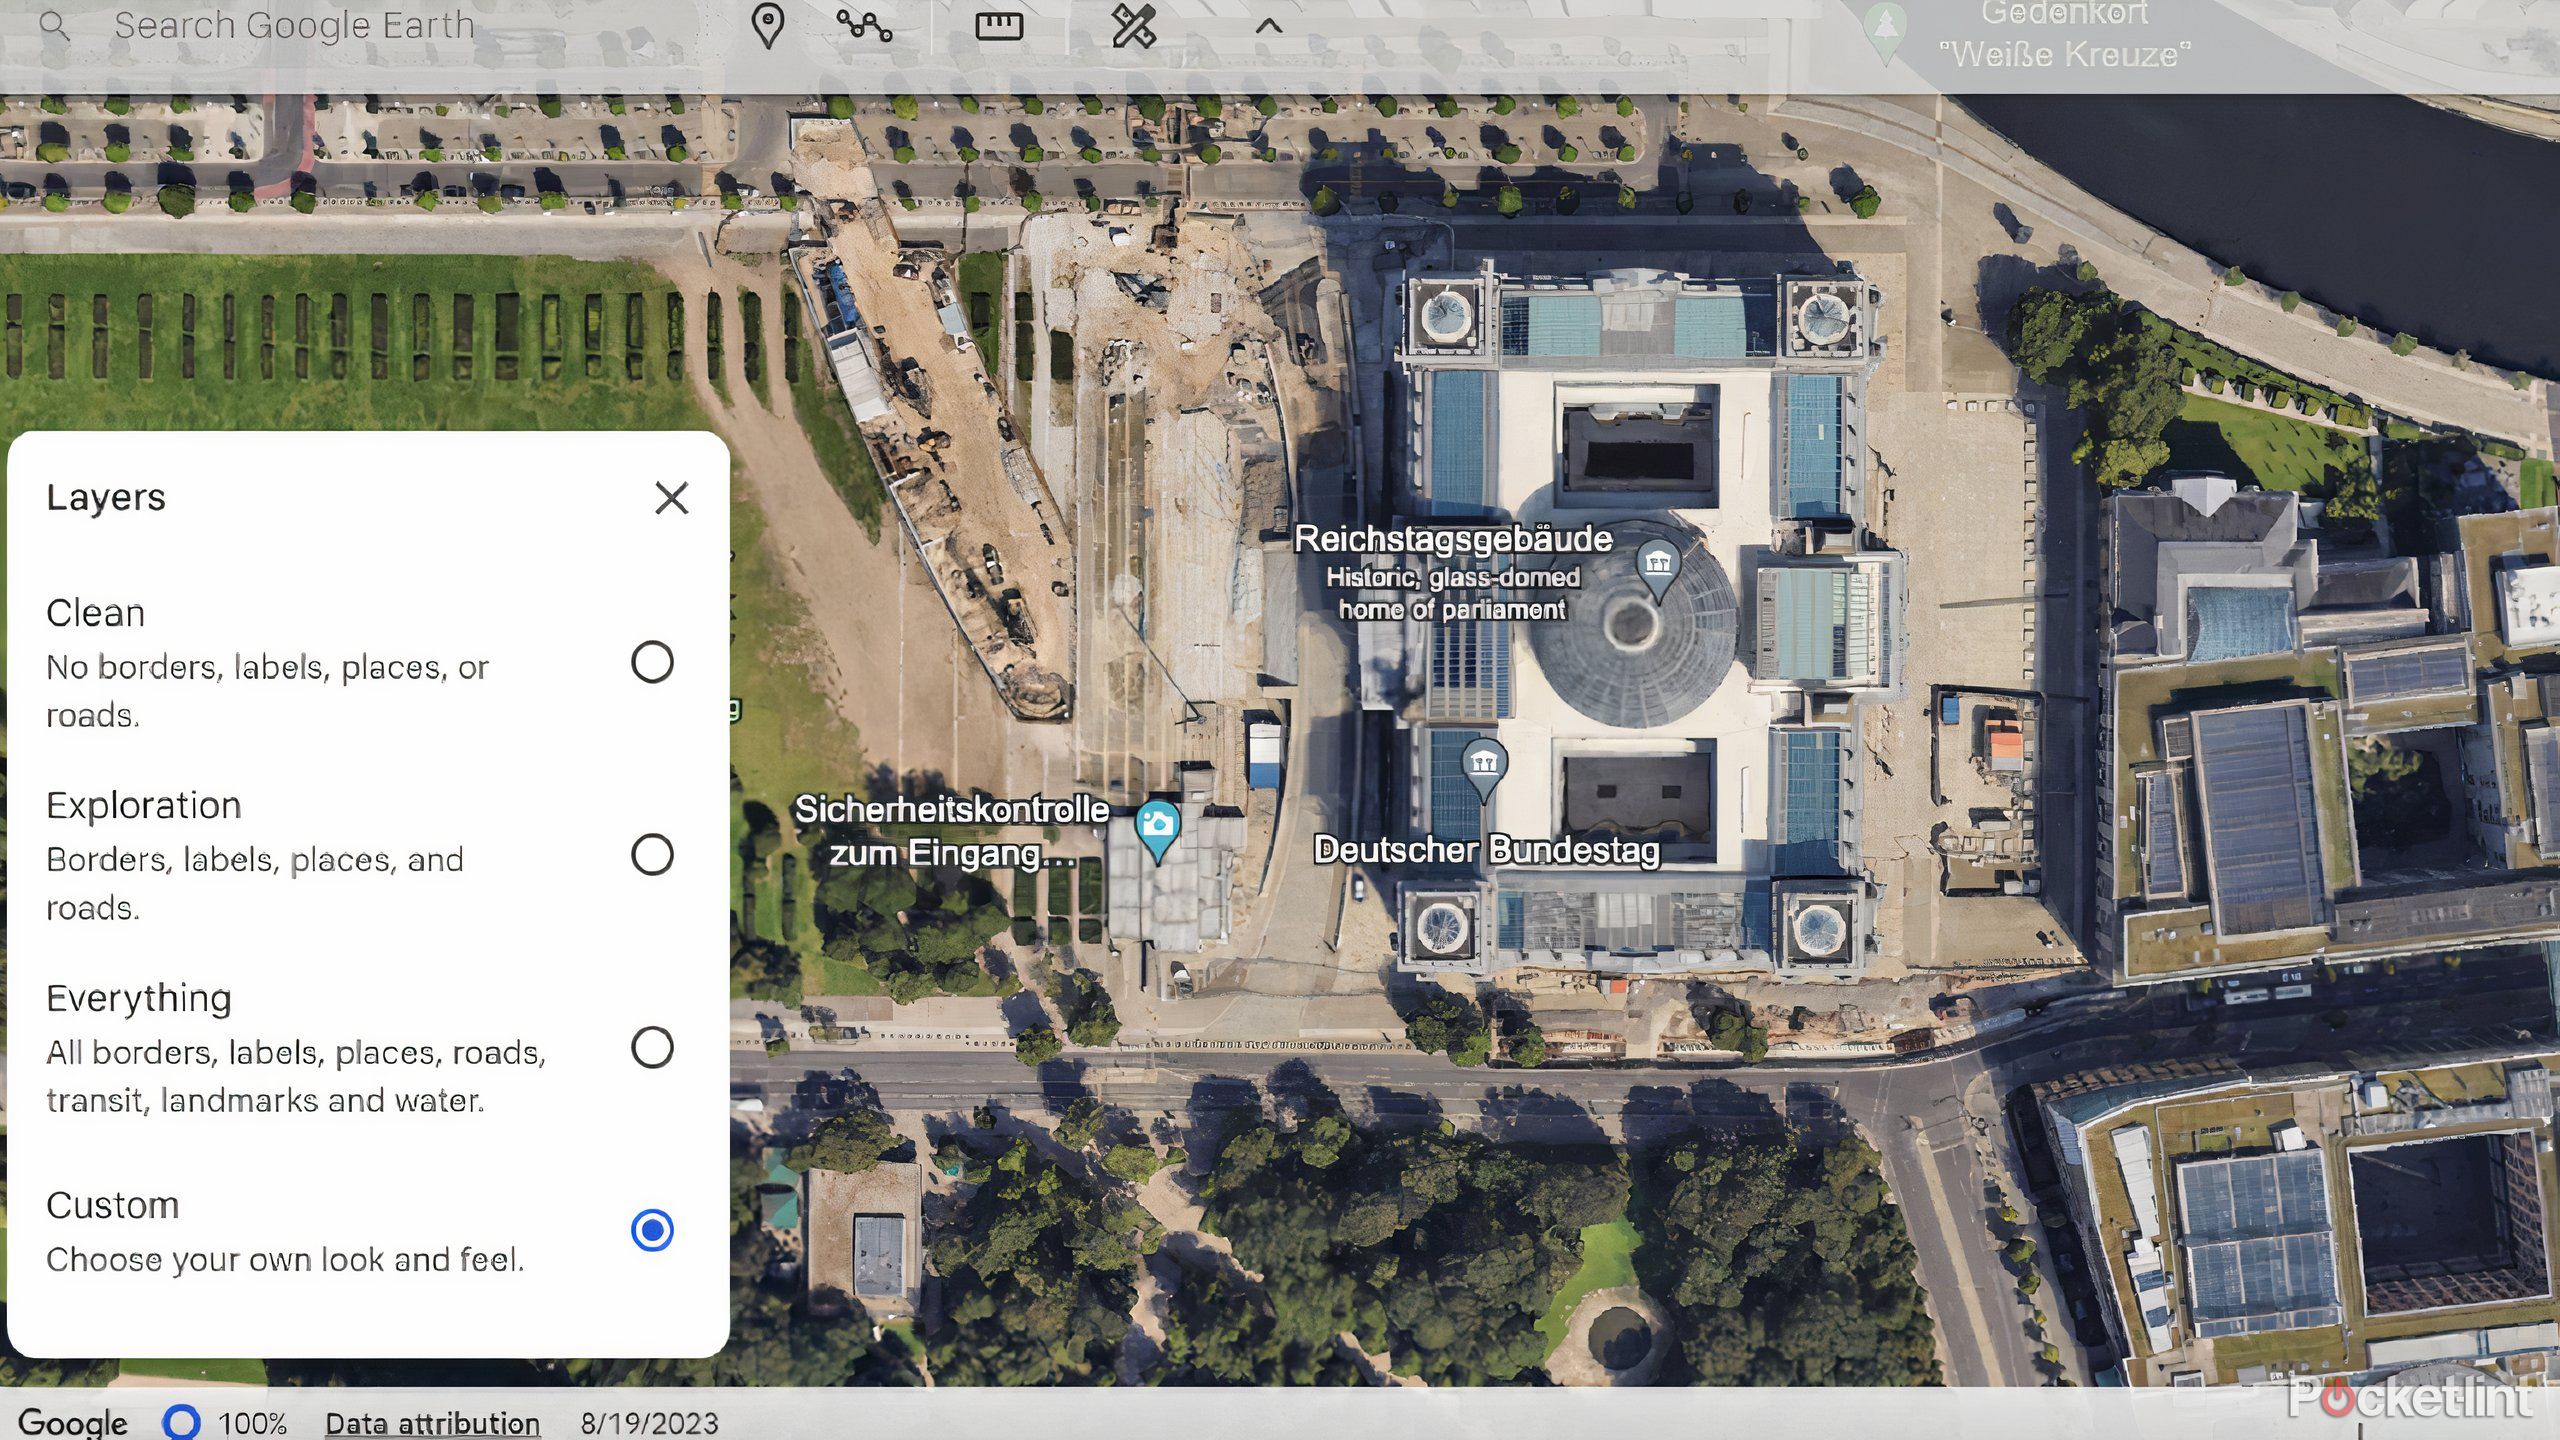 A look at the layers features on Google Earth